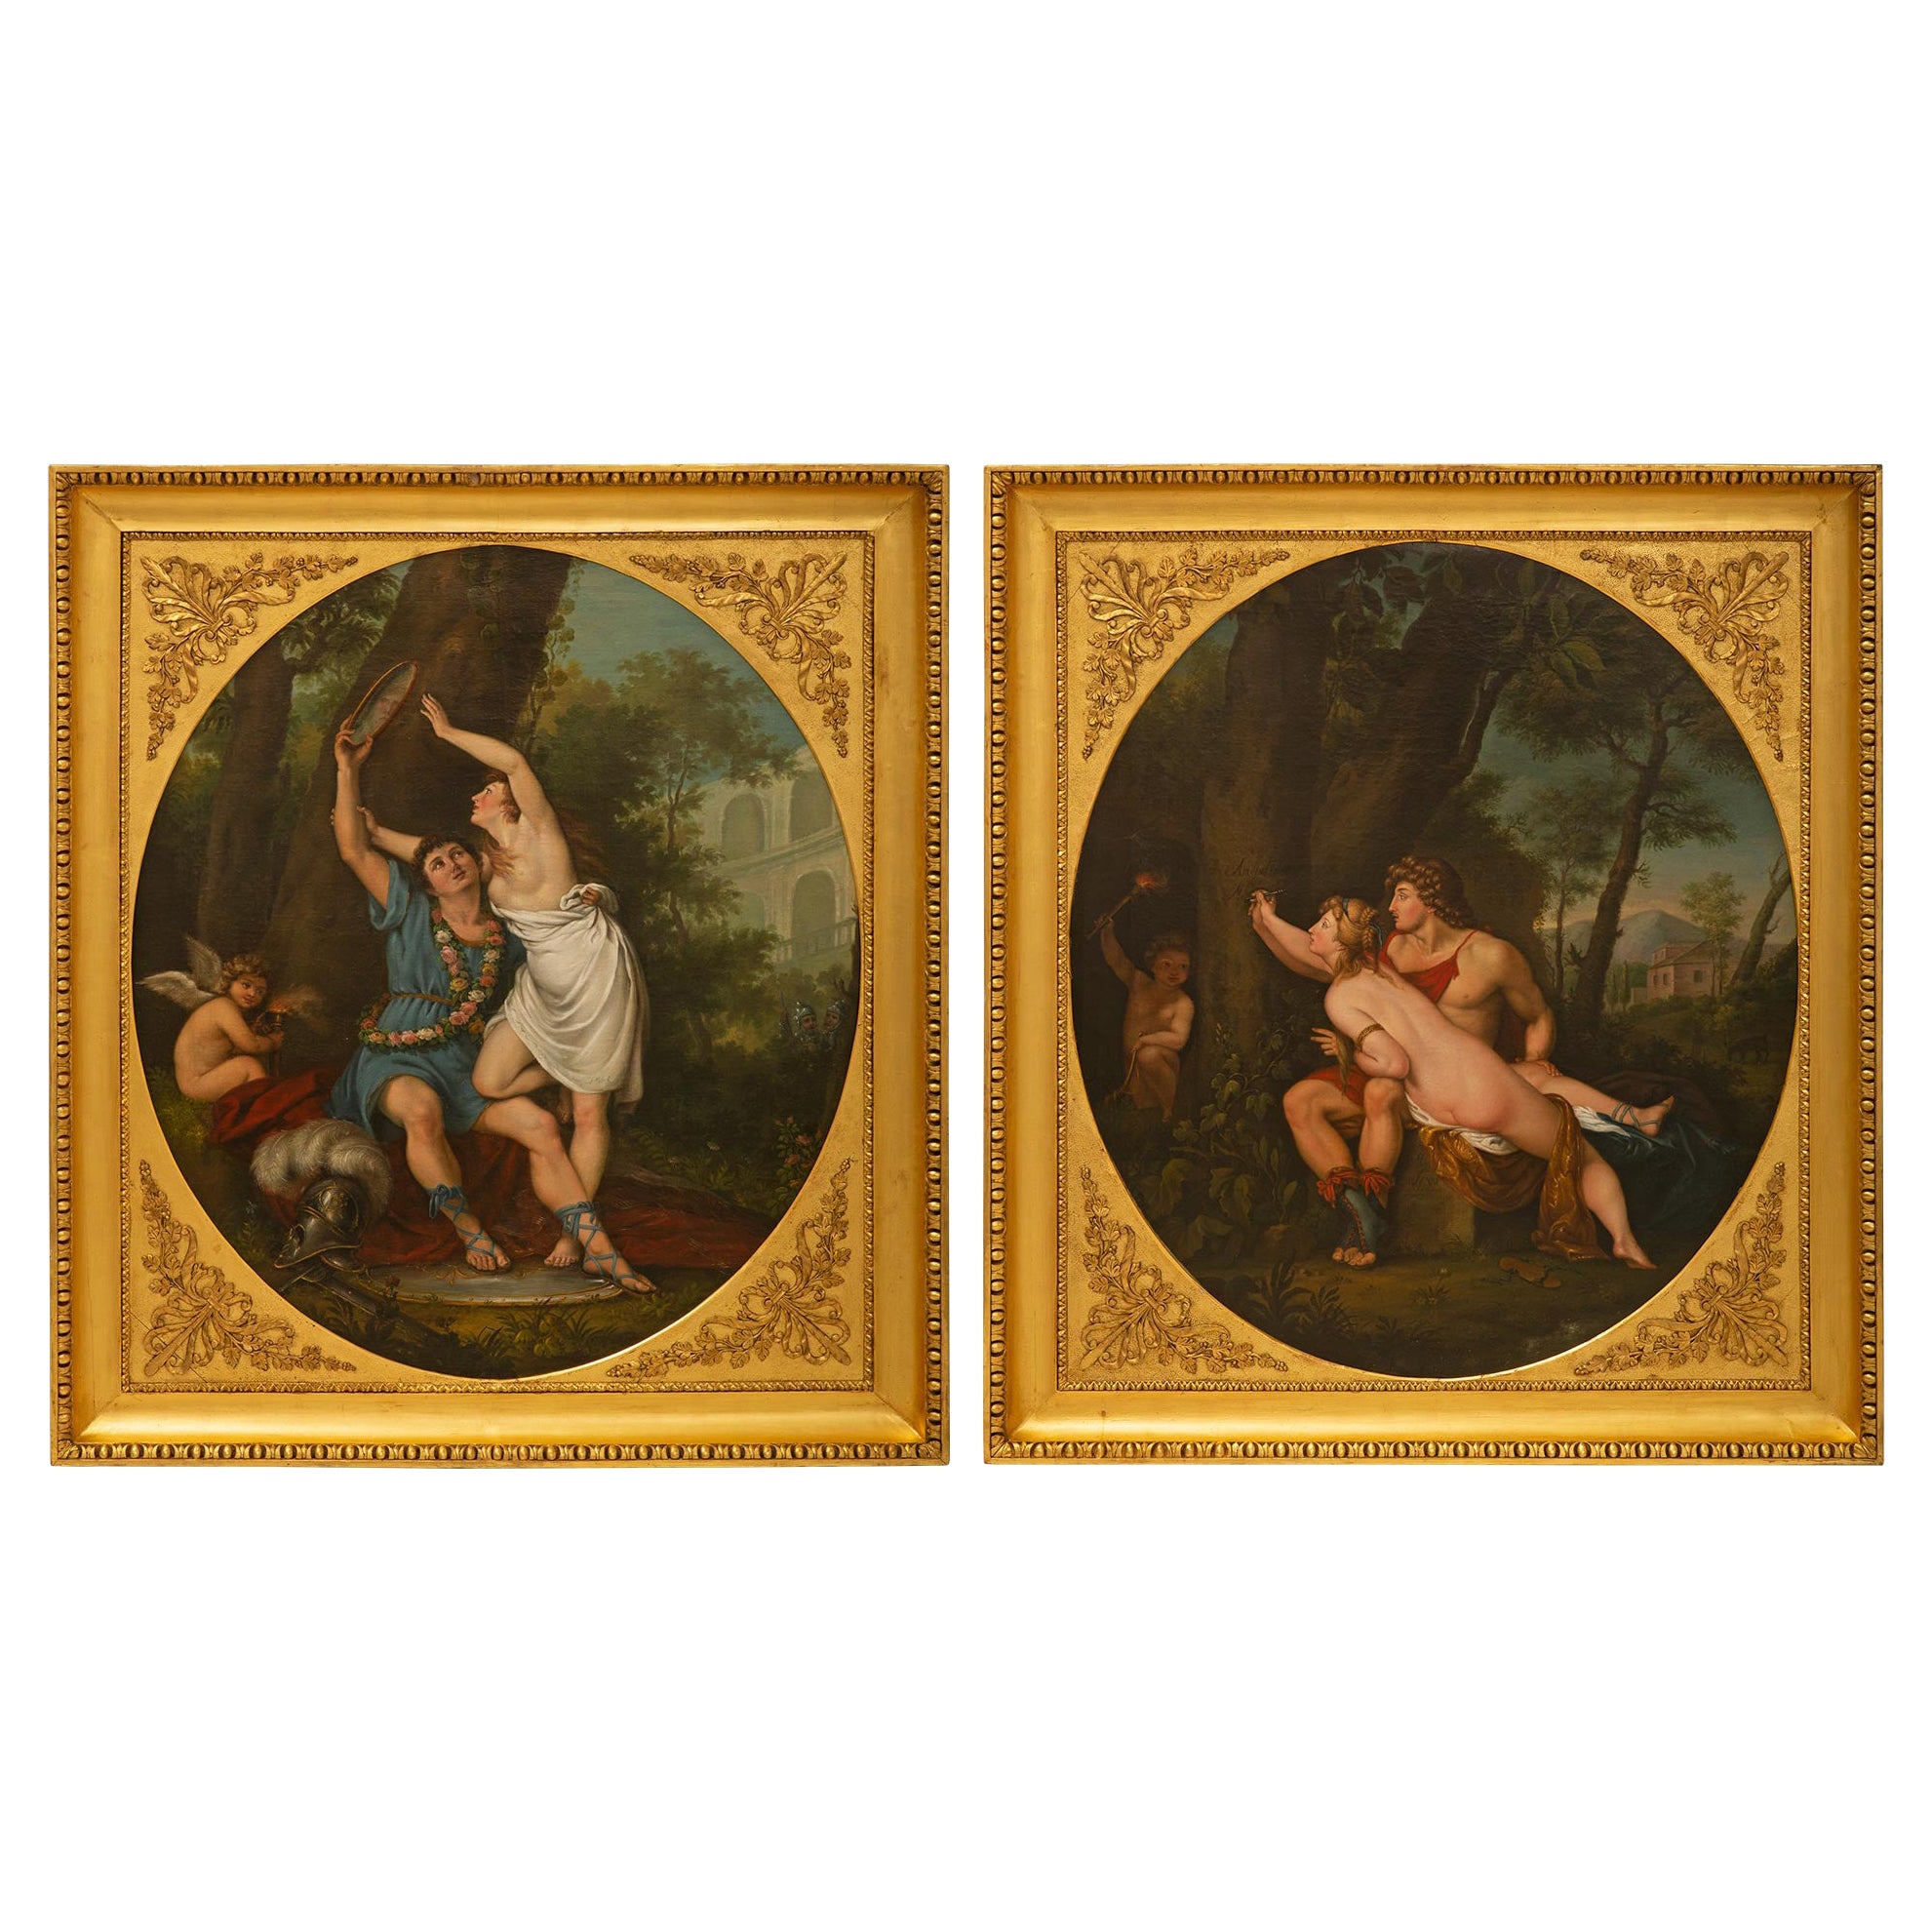 Pair of Italian Late 18th Century Neo-Classical Period Oil on Canvas Paintings